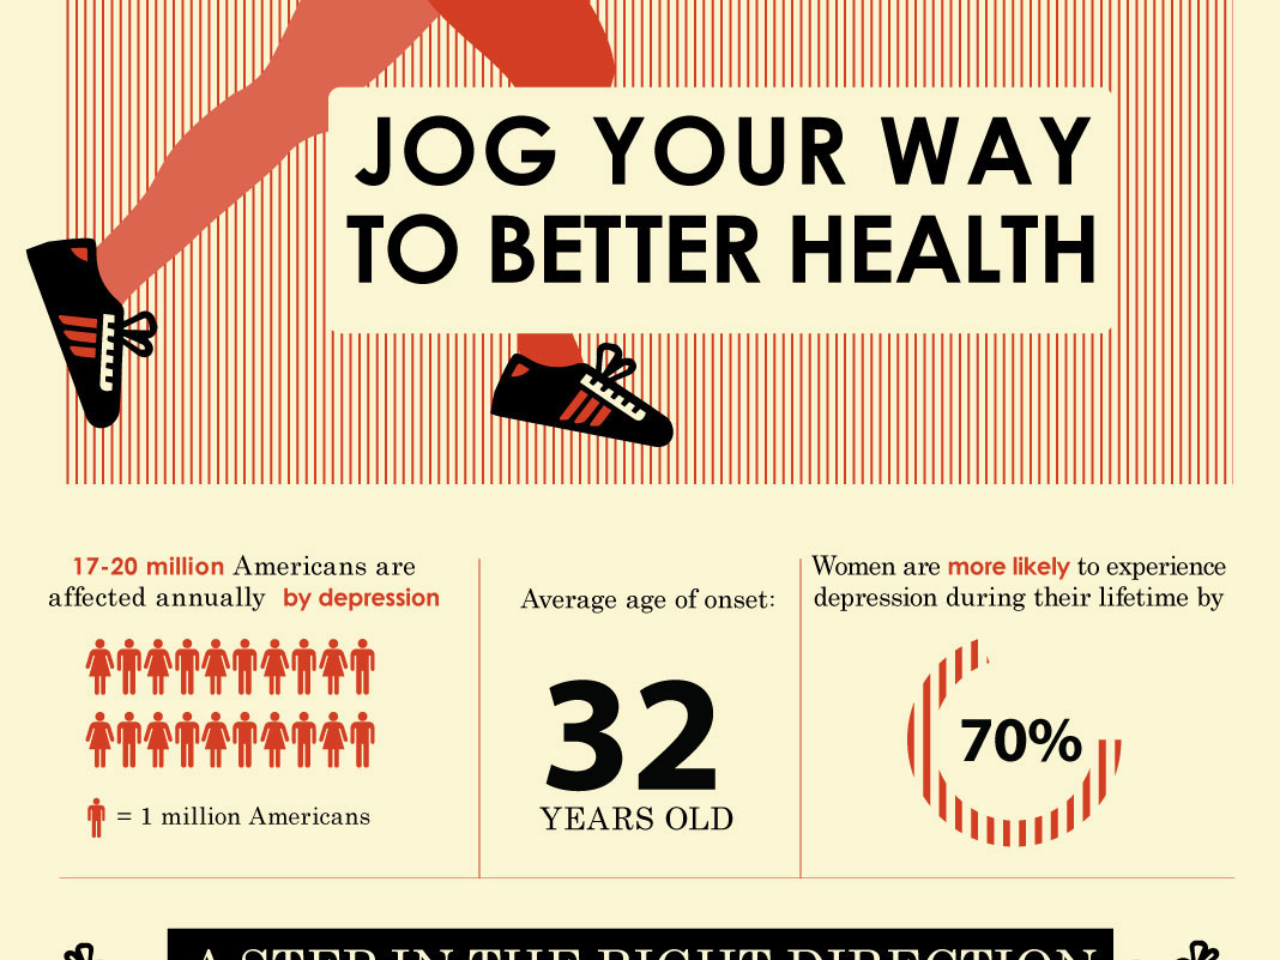 Interesting Facts About Jogging [InfoGraphic]